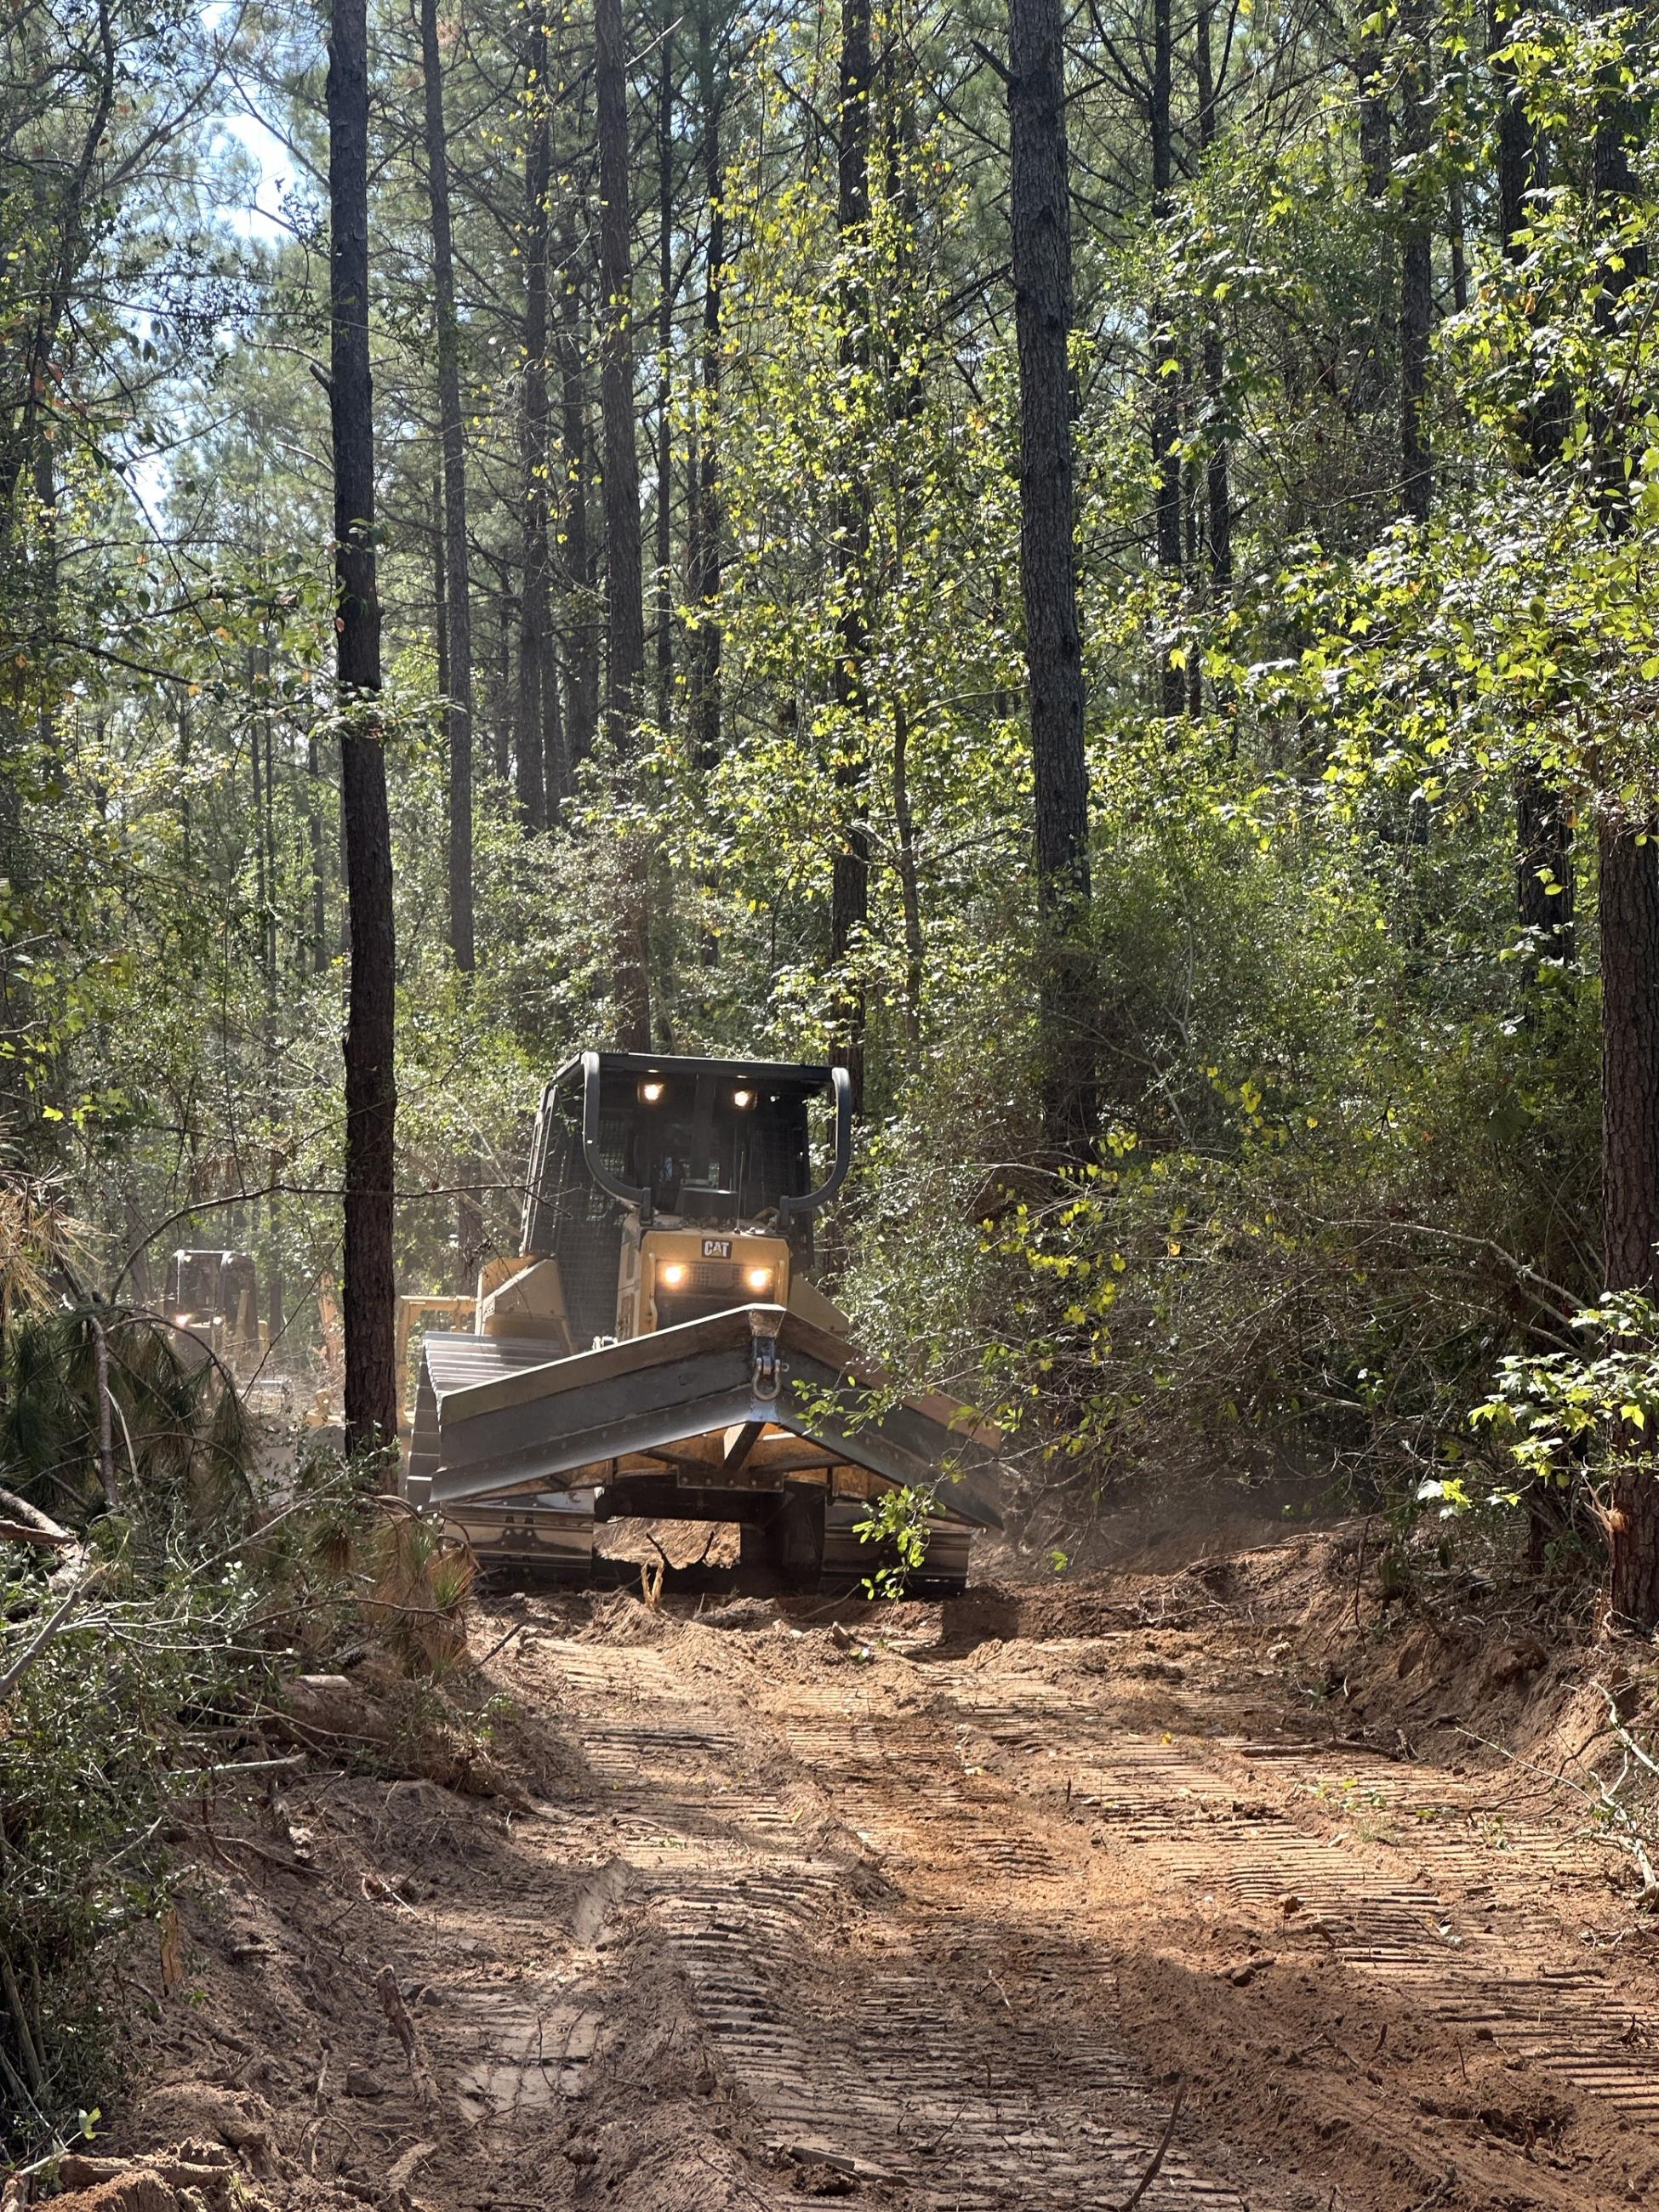 A dozer removes vegetation down to mineral soil to create fireline 